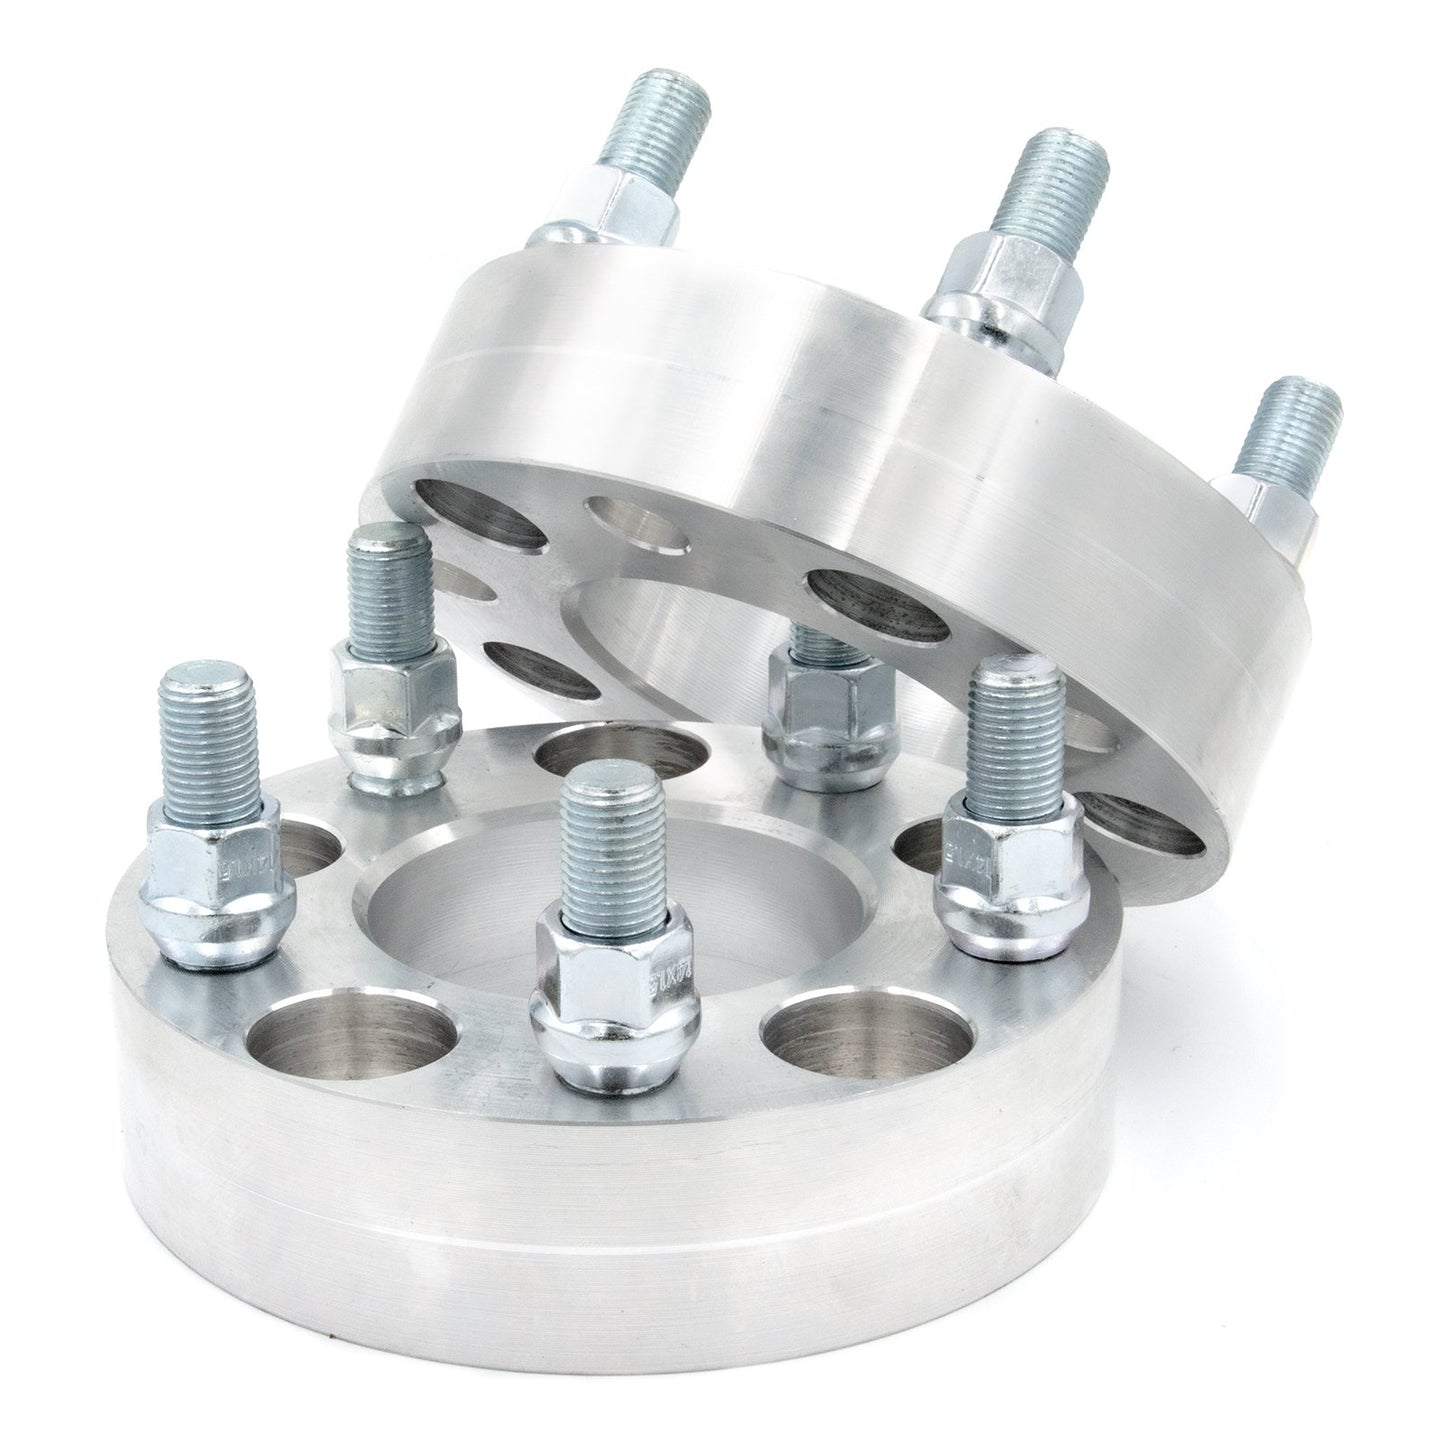 5x120 to 5x100 Wheel Spacer/Adapter - Thickness: 3/4"- 4"